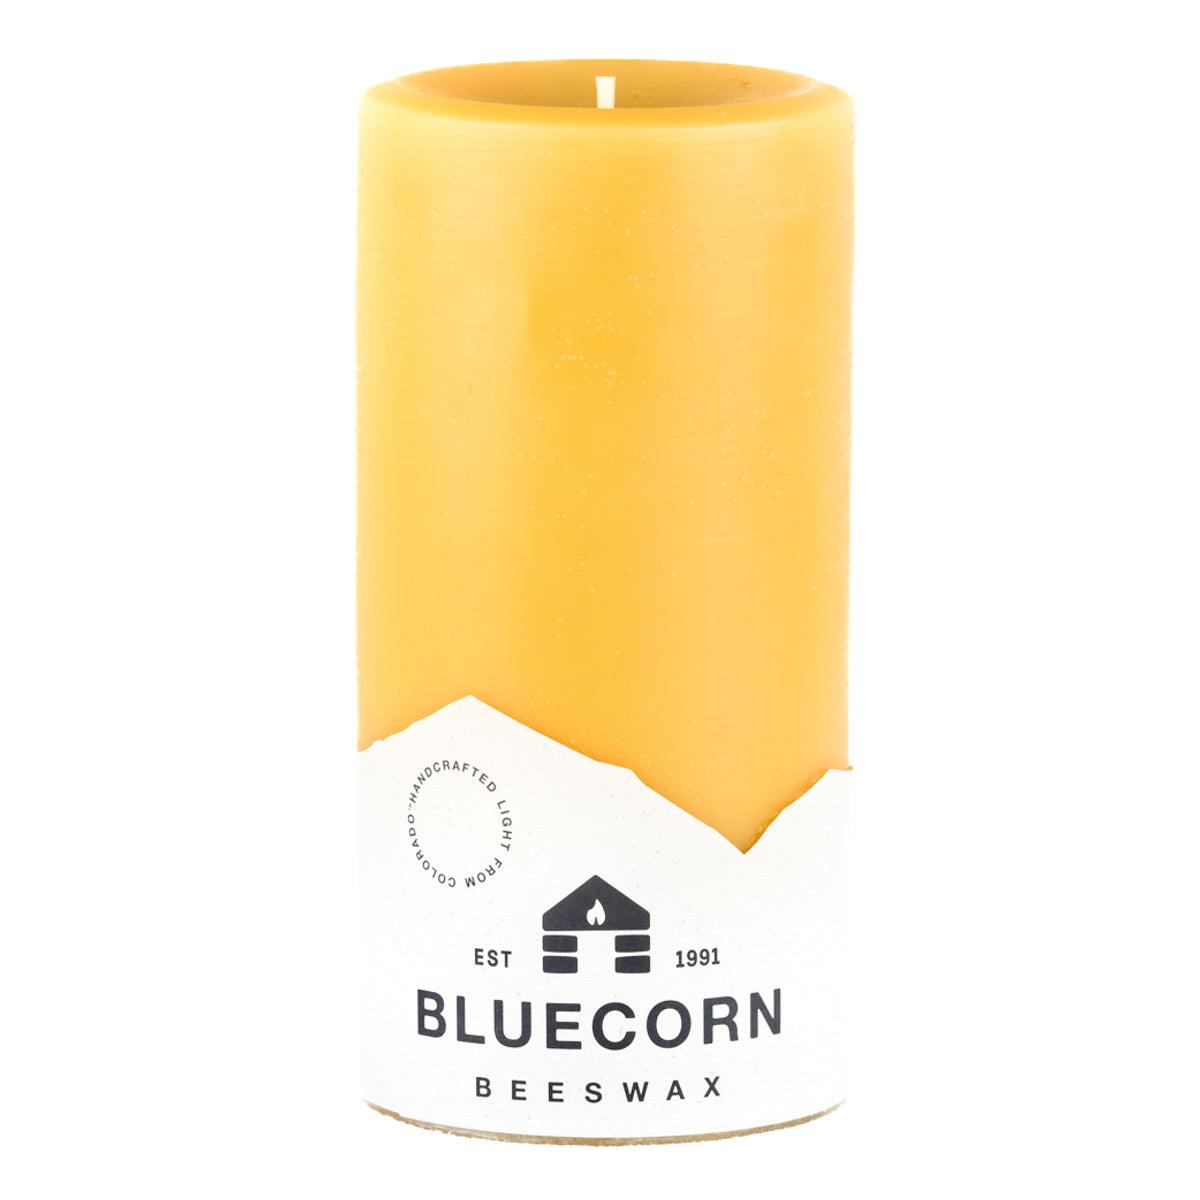 Bluecorn Beeswax 100% Pure Beeswax 4" x 8" Raw Pillar Candle. Burn Time: 240 hours. Made with 100% Pure Beeswax, is golden in color, with a light honey scent. Made with 100% pure cotton wick, no lead and paraffin free. Clean burning and non-toxic. Features Bluecorn Beeswax label printed on 100% recycled paper. 